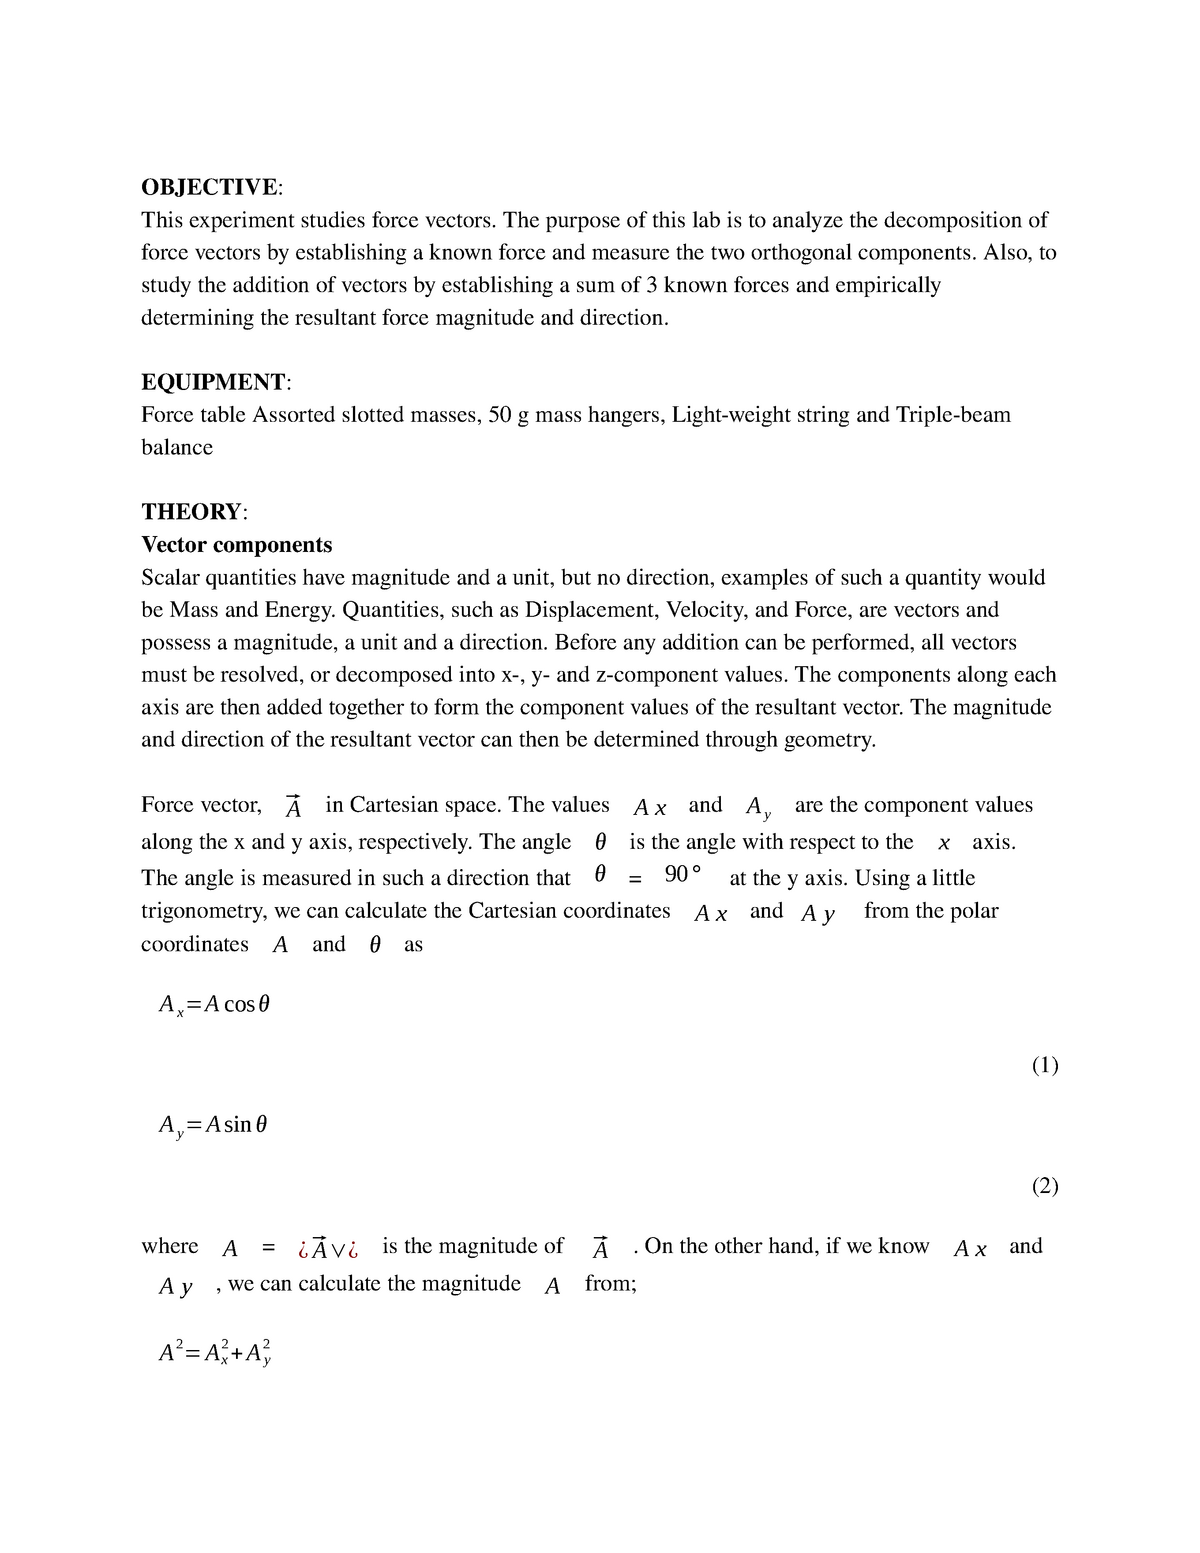 Physics Lab 5 - OBJECTIVE: This experiment studies force vectors. The ...